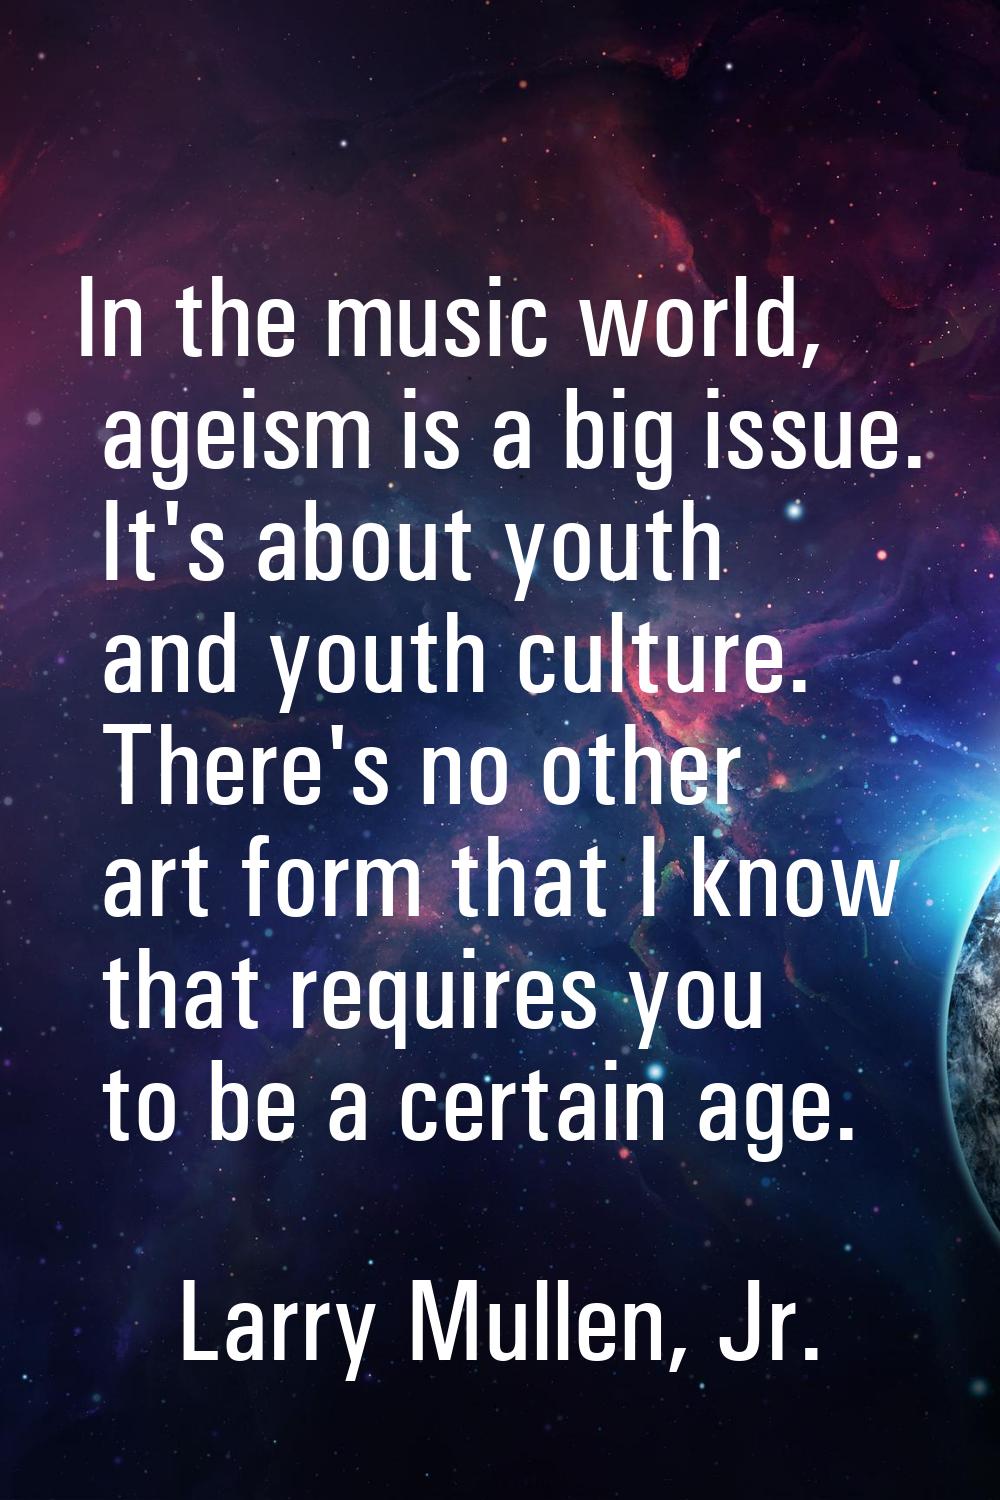 In the music world, ageism is a big issue. It's about youth and youth culture. There's no other art